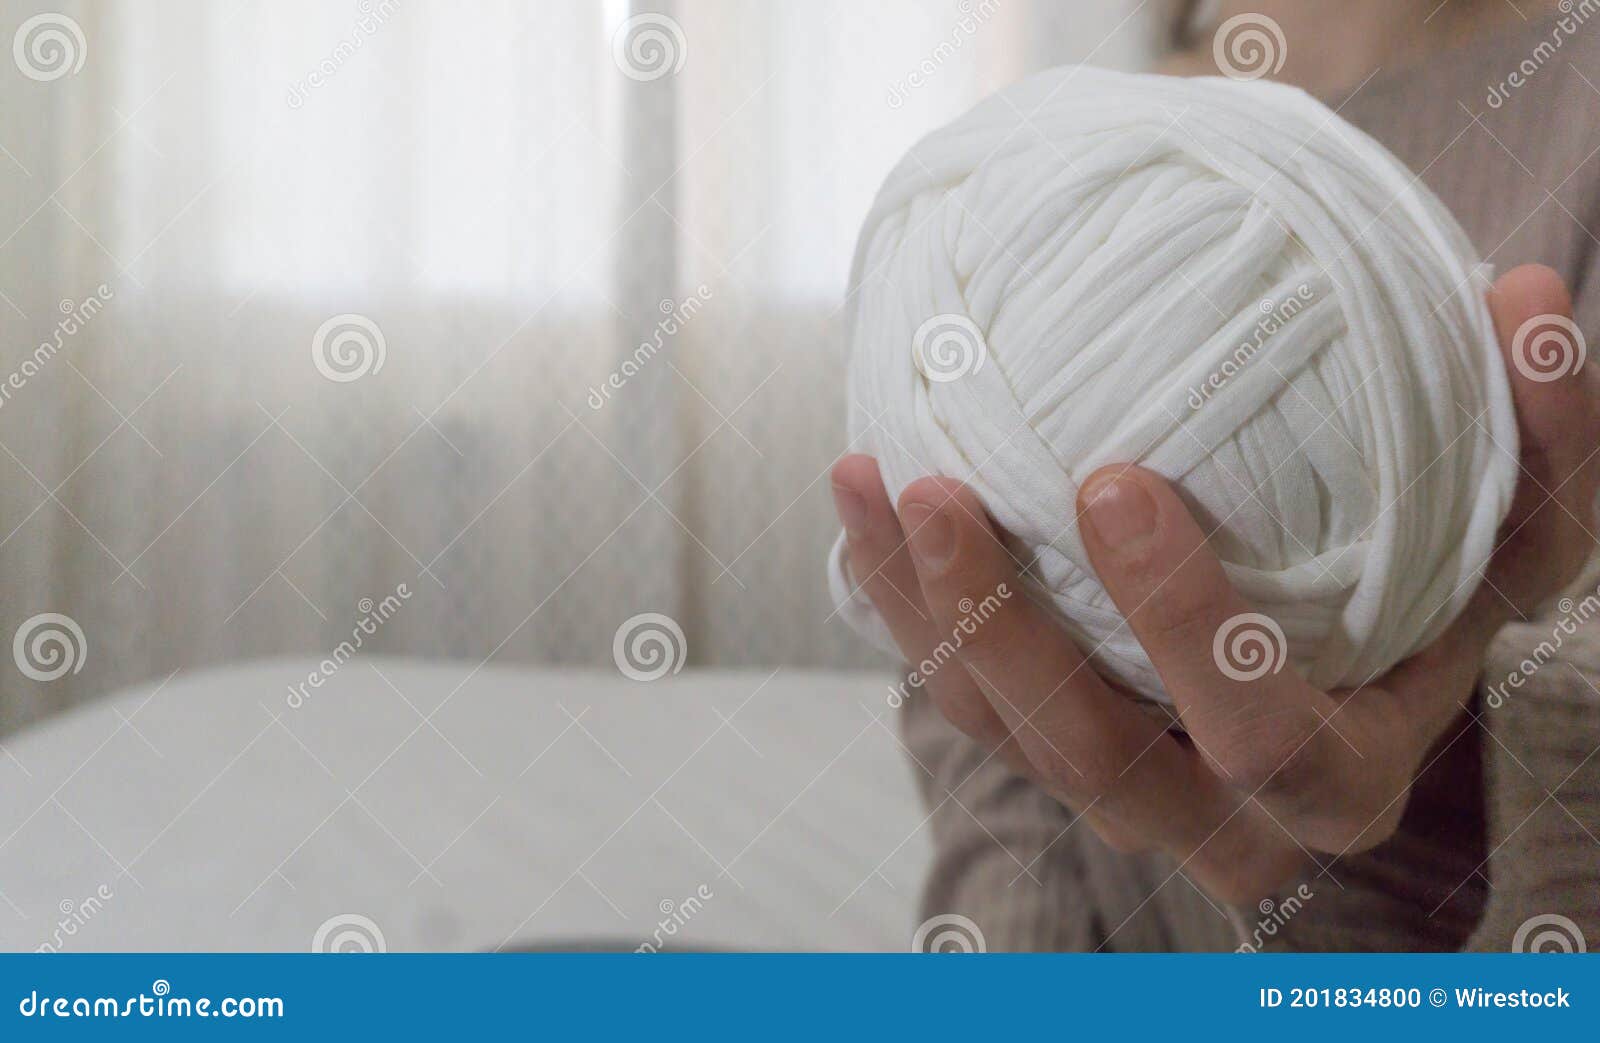 Girl Holding in Hand on of the Crochet Yarn Ball Stock Image - Image of  decor, grey: 150505727